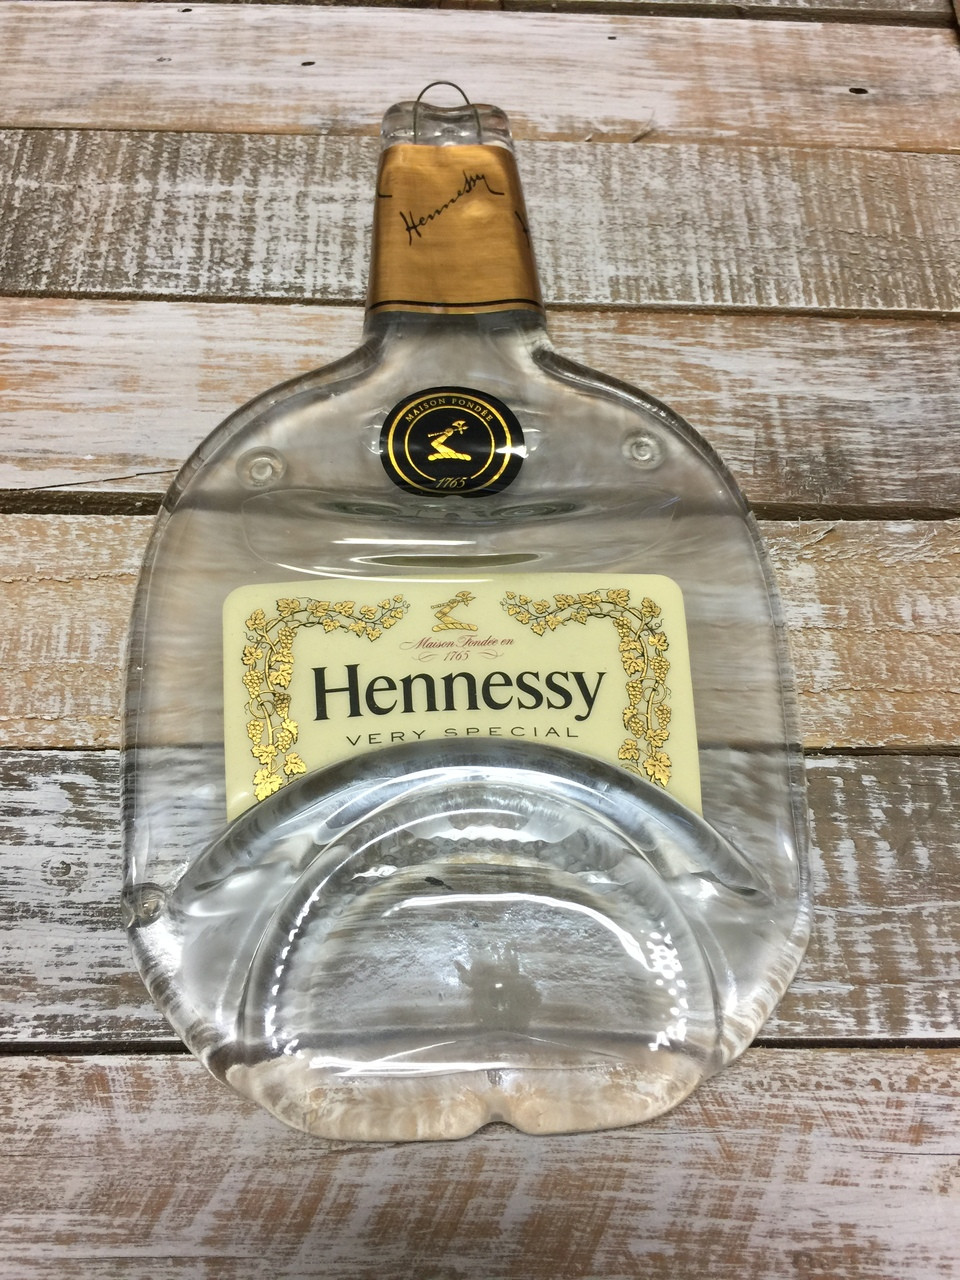 Hennessy Very Special Handmade Serving Tray - Melted Glass Whiskey Bottle  1.5 Liter - Landfill Dzine®